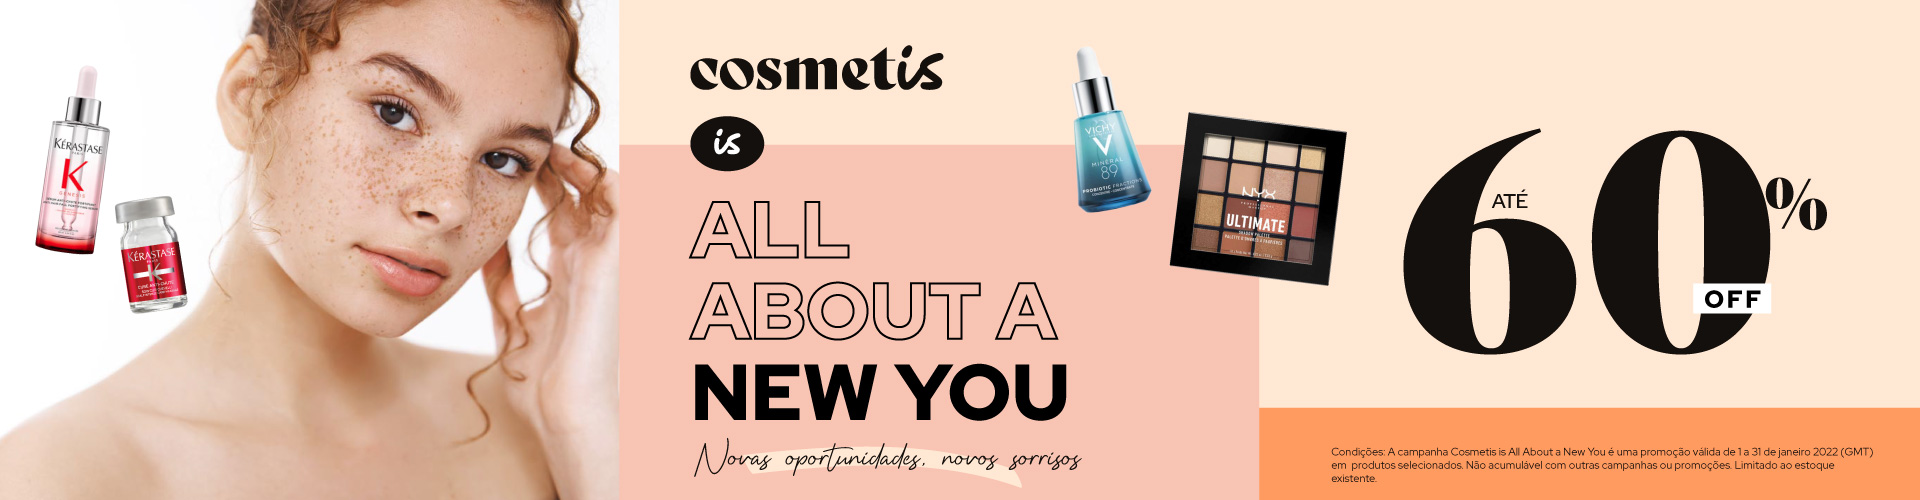 Cosmetis is all about a new you